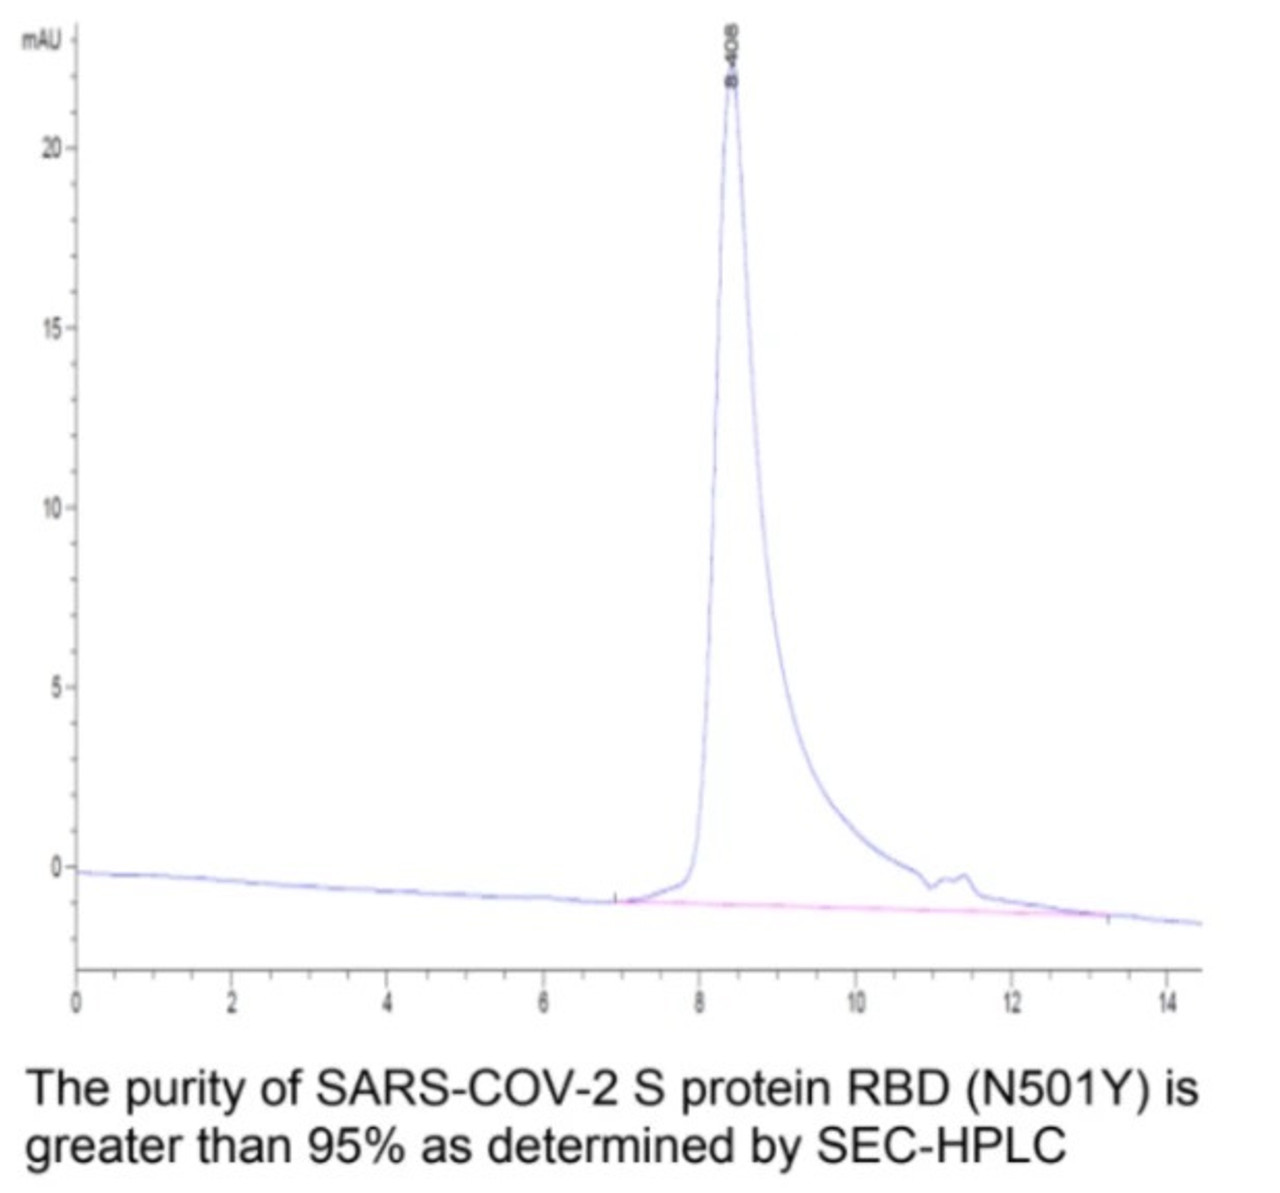 The purity of SARS-COV-2 S protein RBD (N501Y) is greater than 95% as determiend by SEC-HPLC.